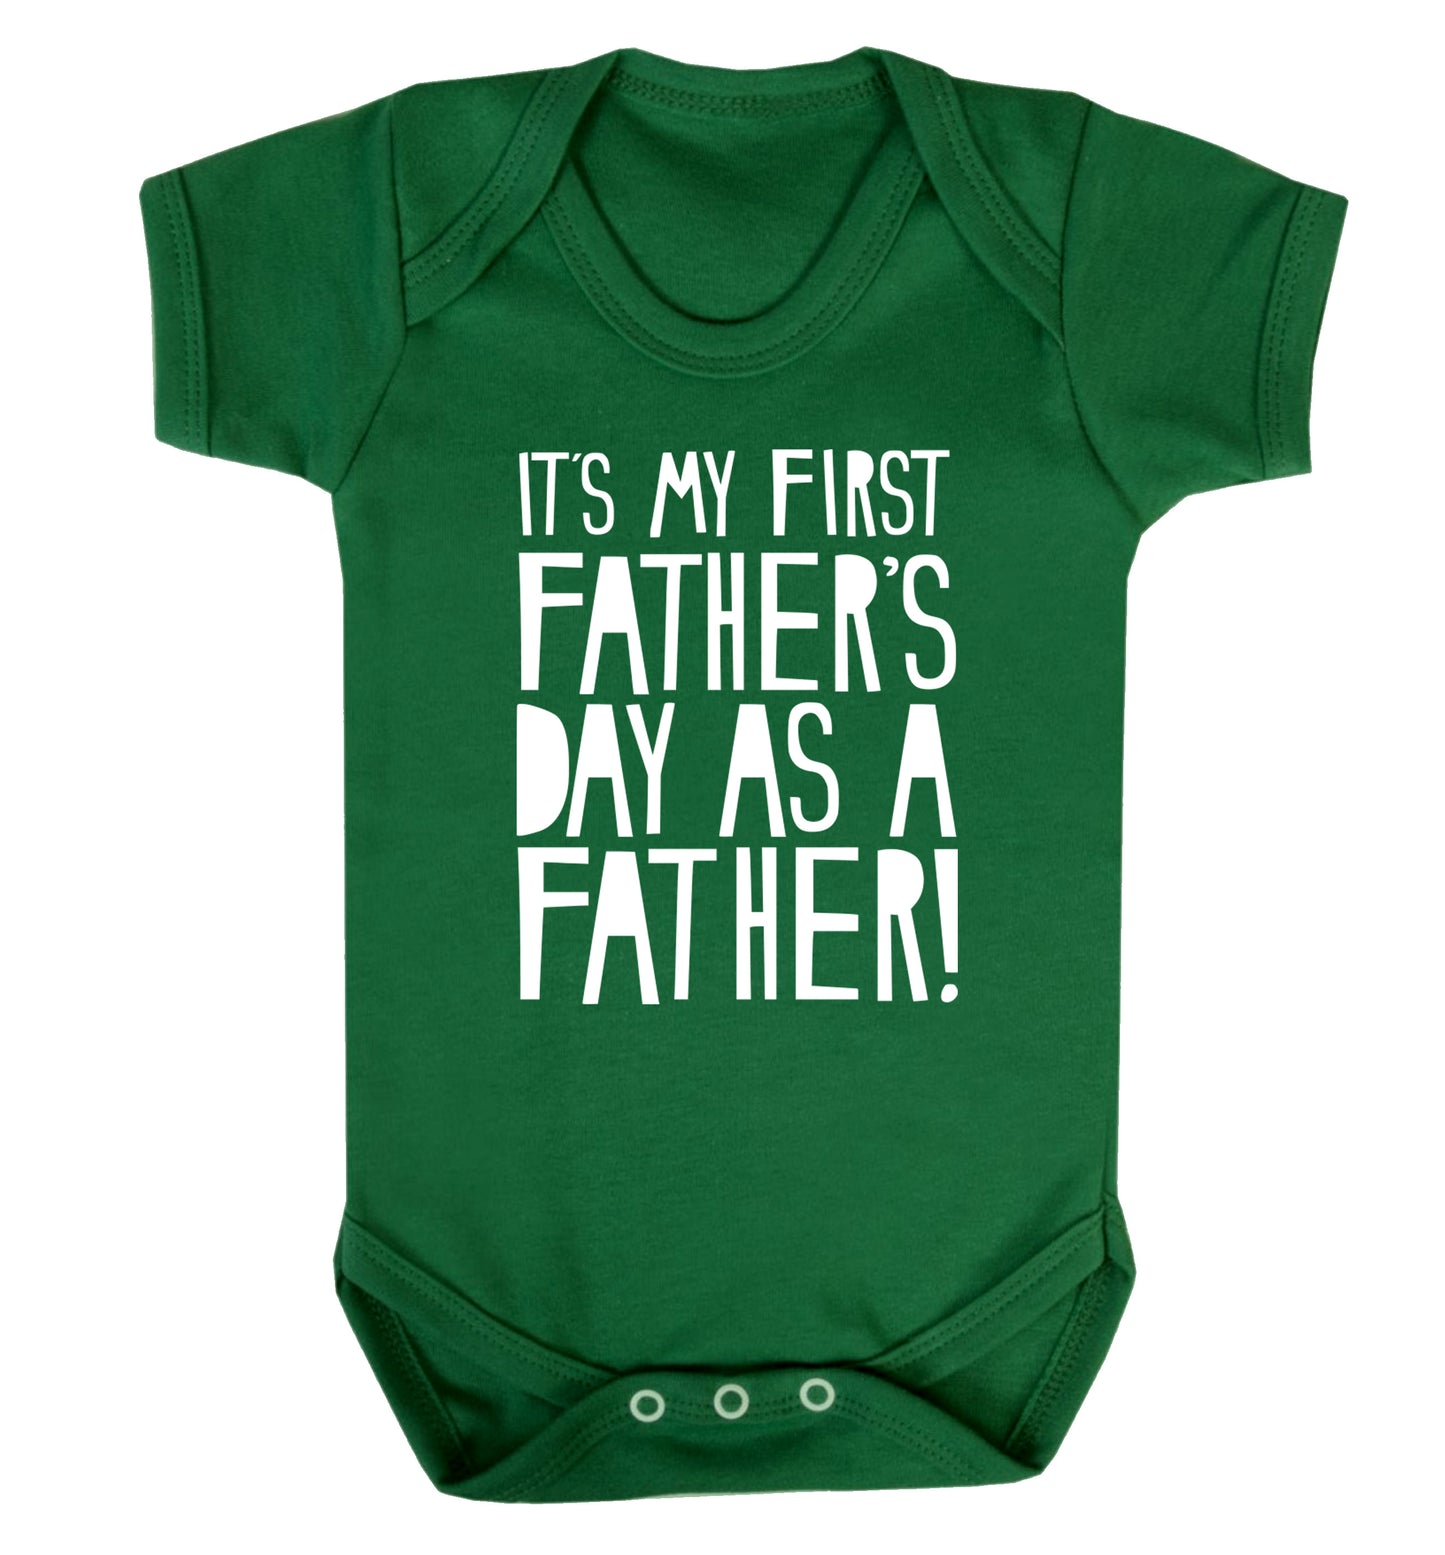 It's my first Father's Day as a father! Baby Vest green 18-24 months